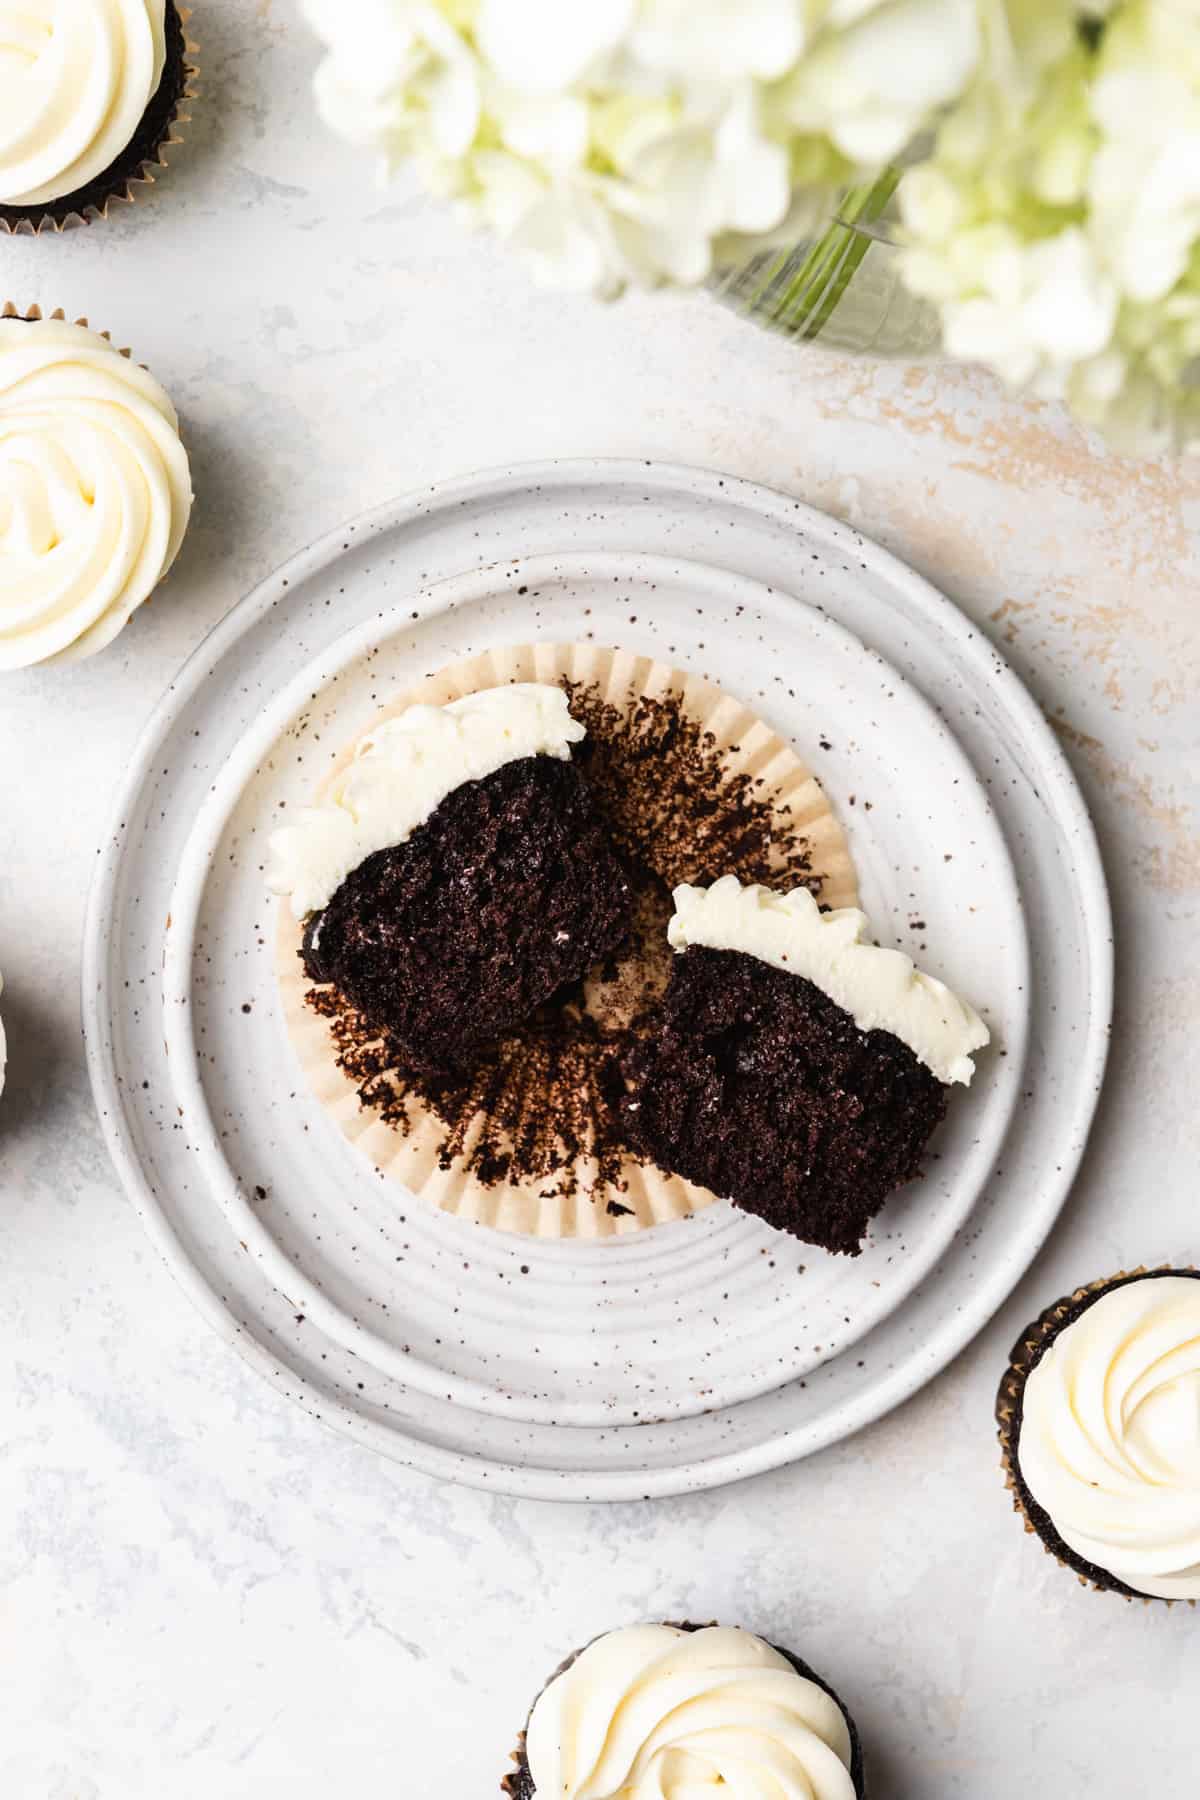 A chocolate cupcake with cream cheese frosting cut in half on a white plate.